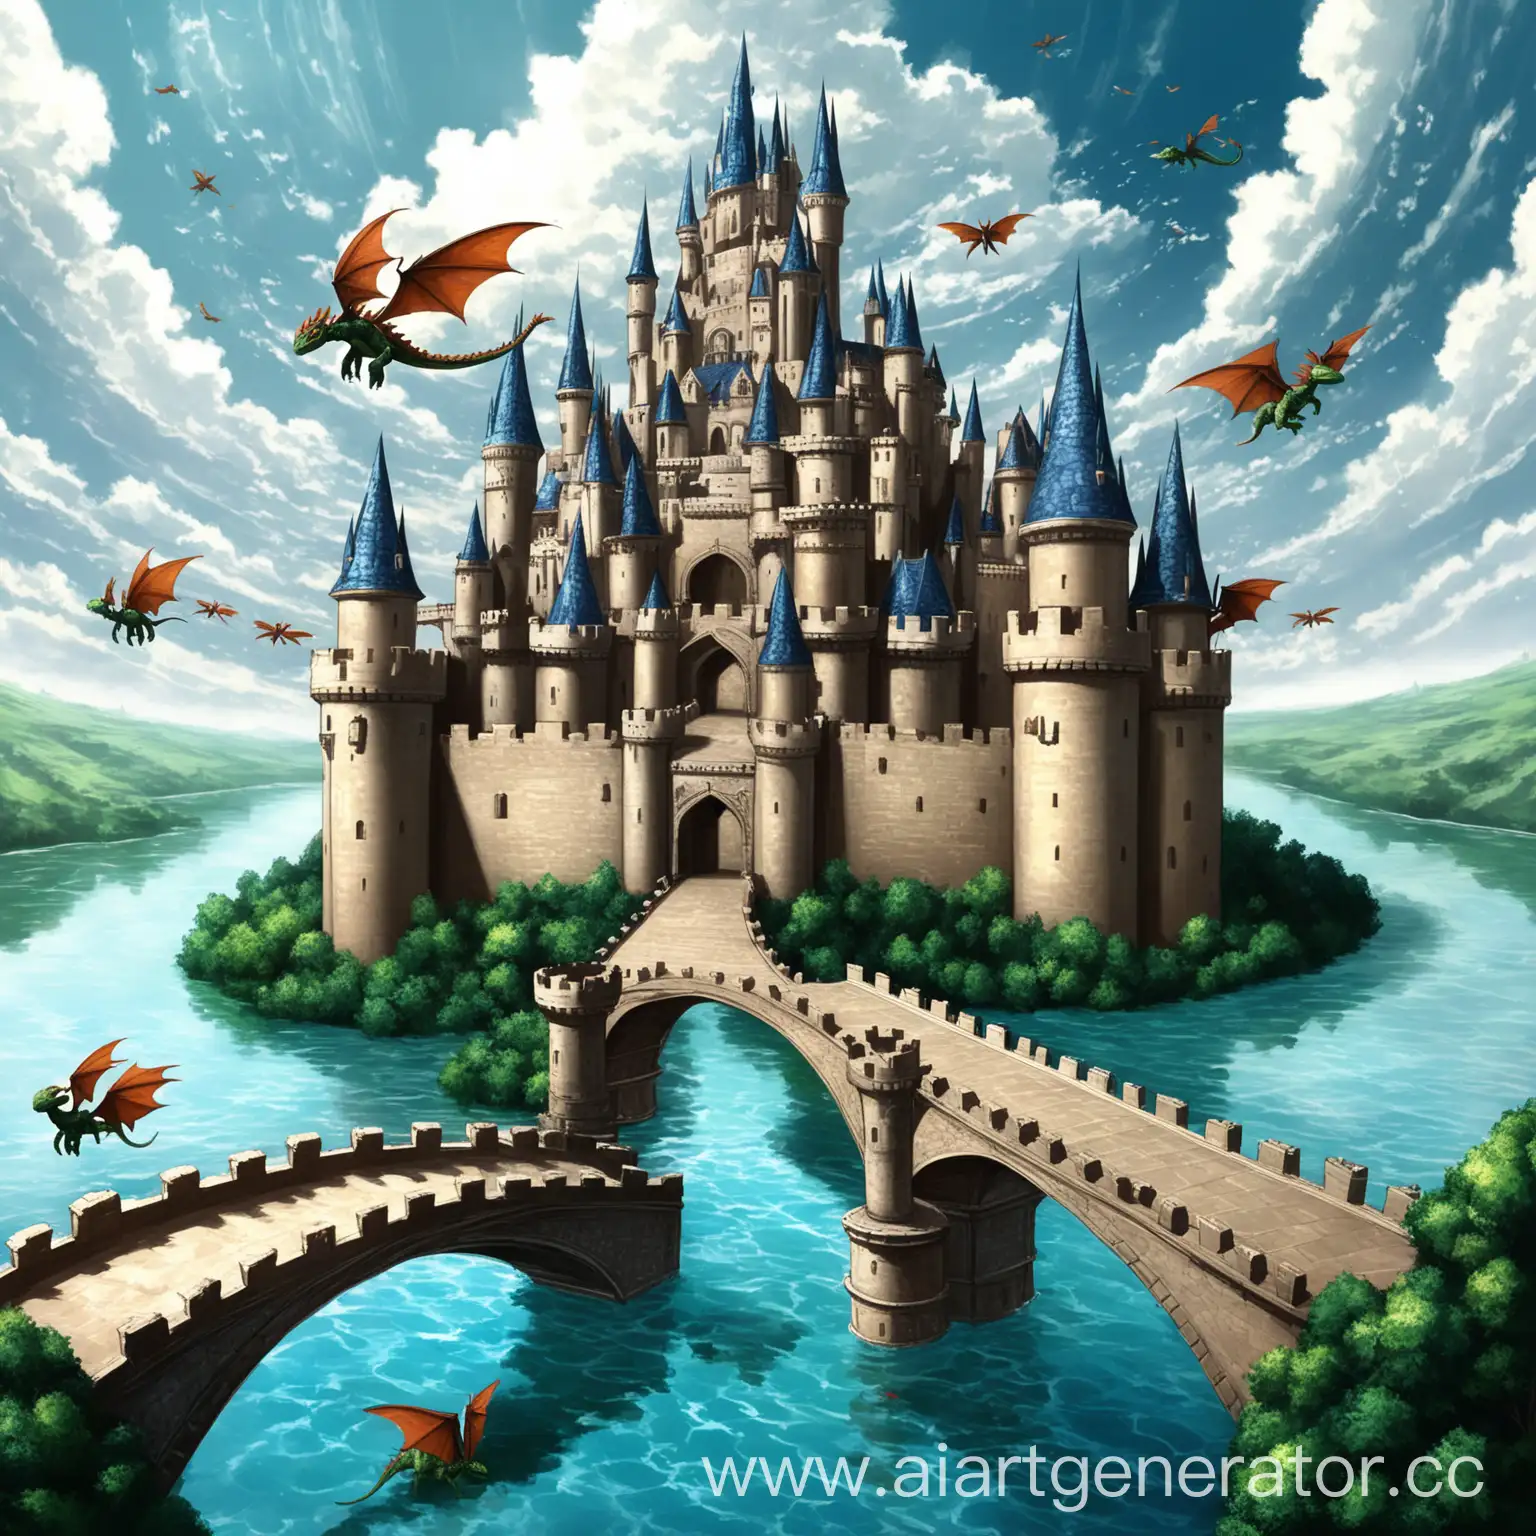 Majestic-Castle-Surrounded-by-Bridges-over-Water-with-Flying-Dragons